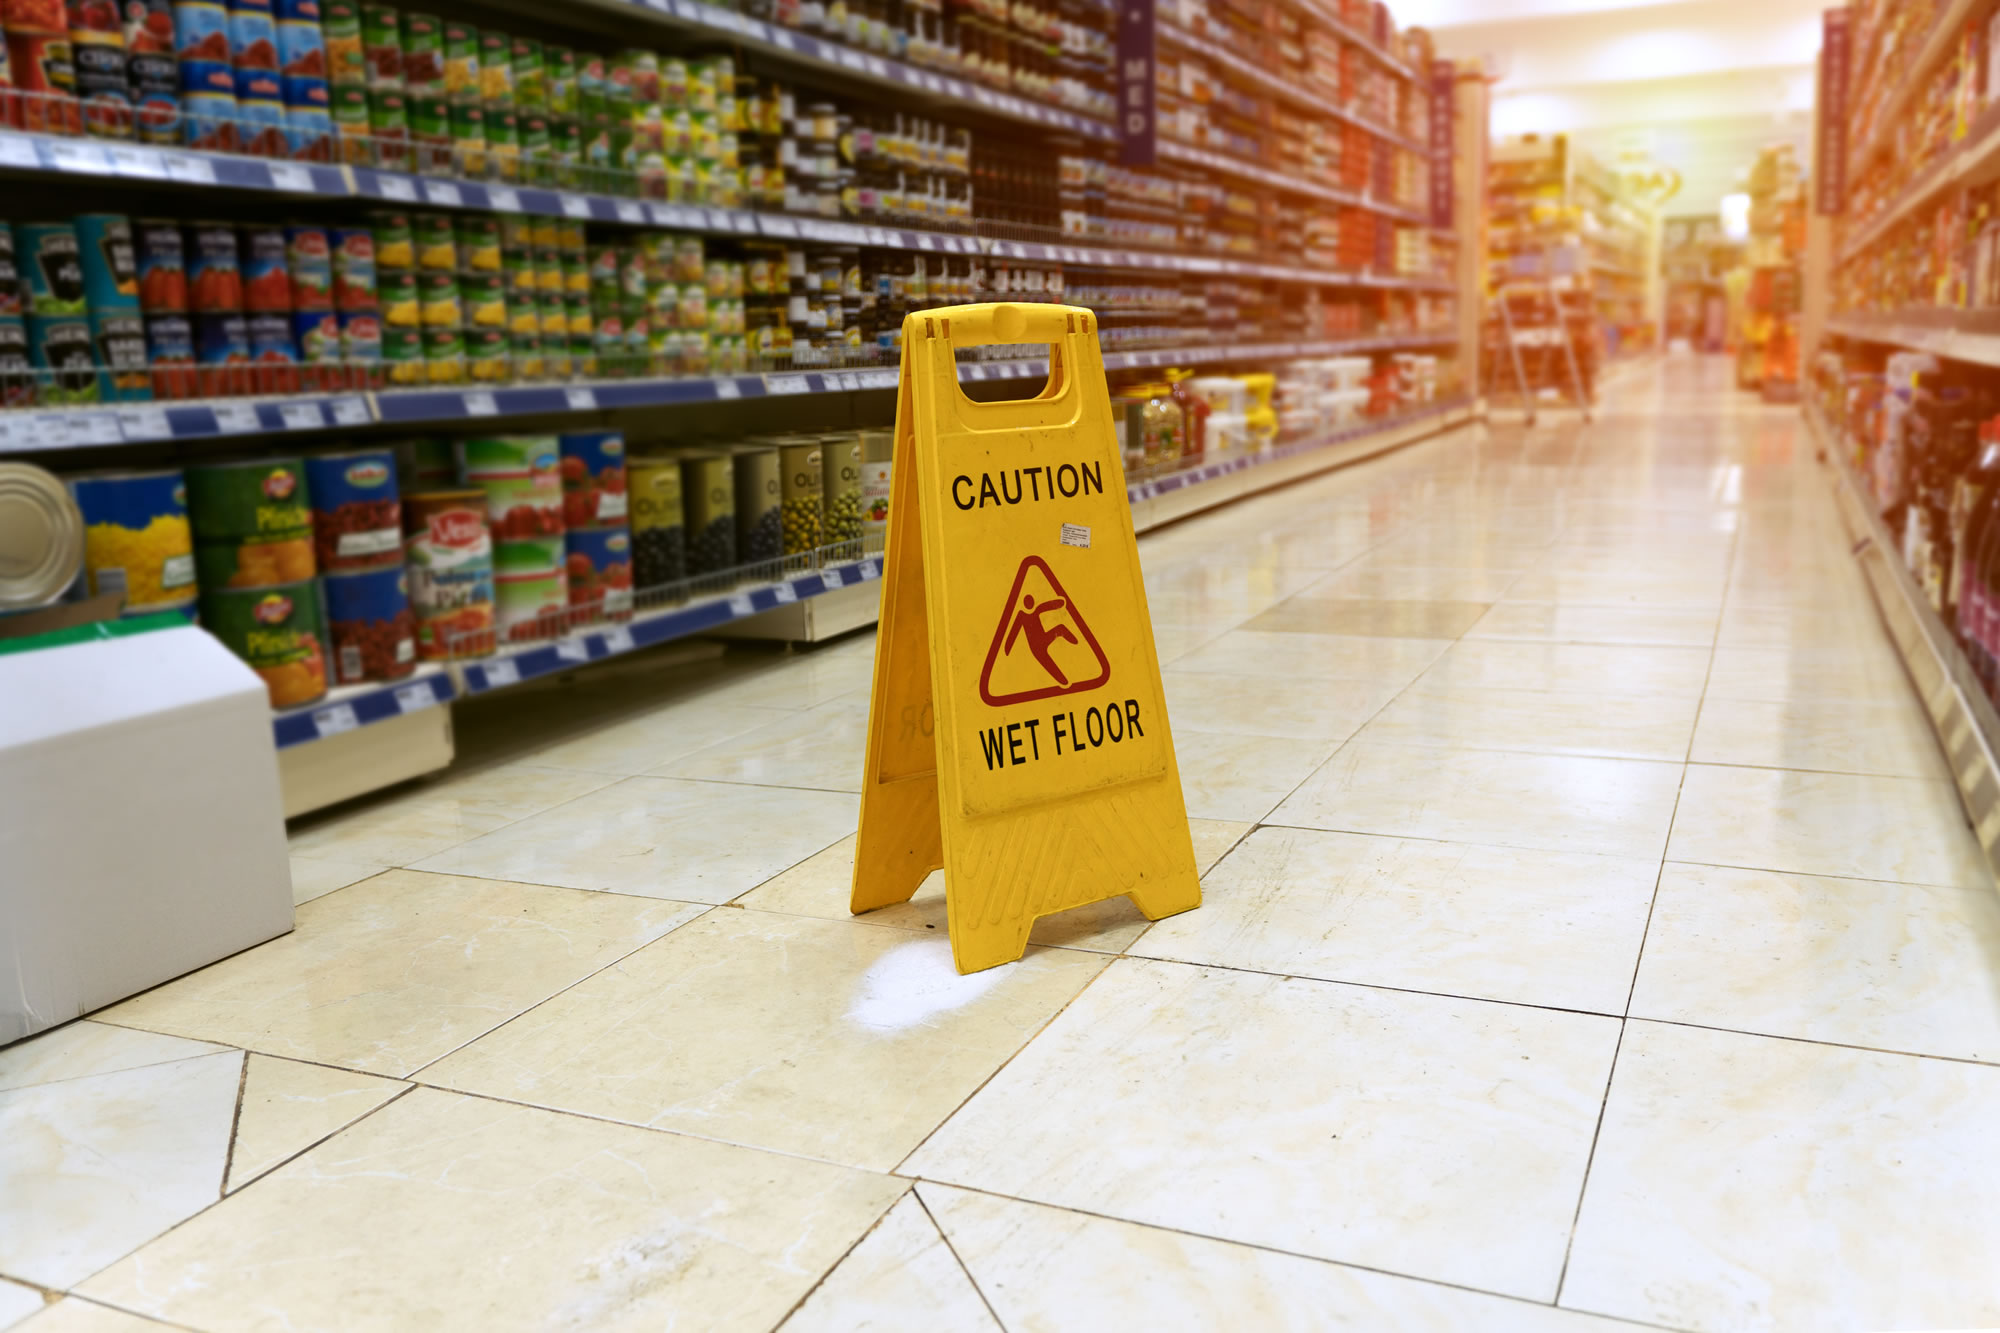 Slip, Trip and Fall in supermarkets, shops and shopping centres